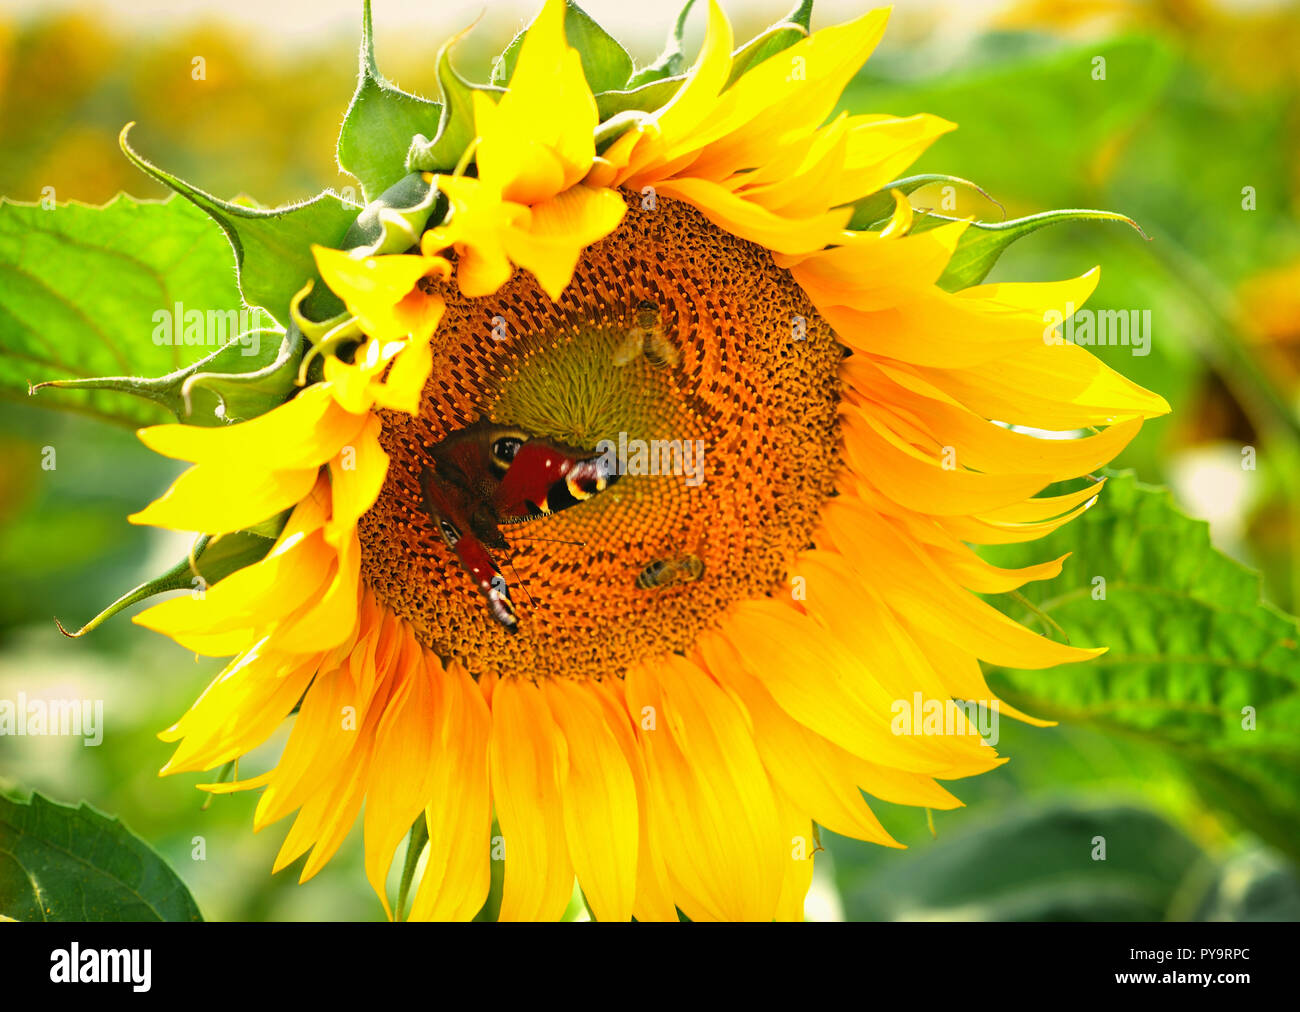 Sunflower flower in the sunlight close-up with butterfly Stock Photo